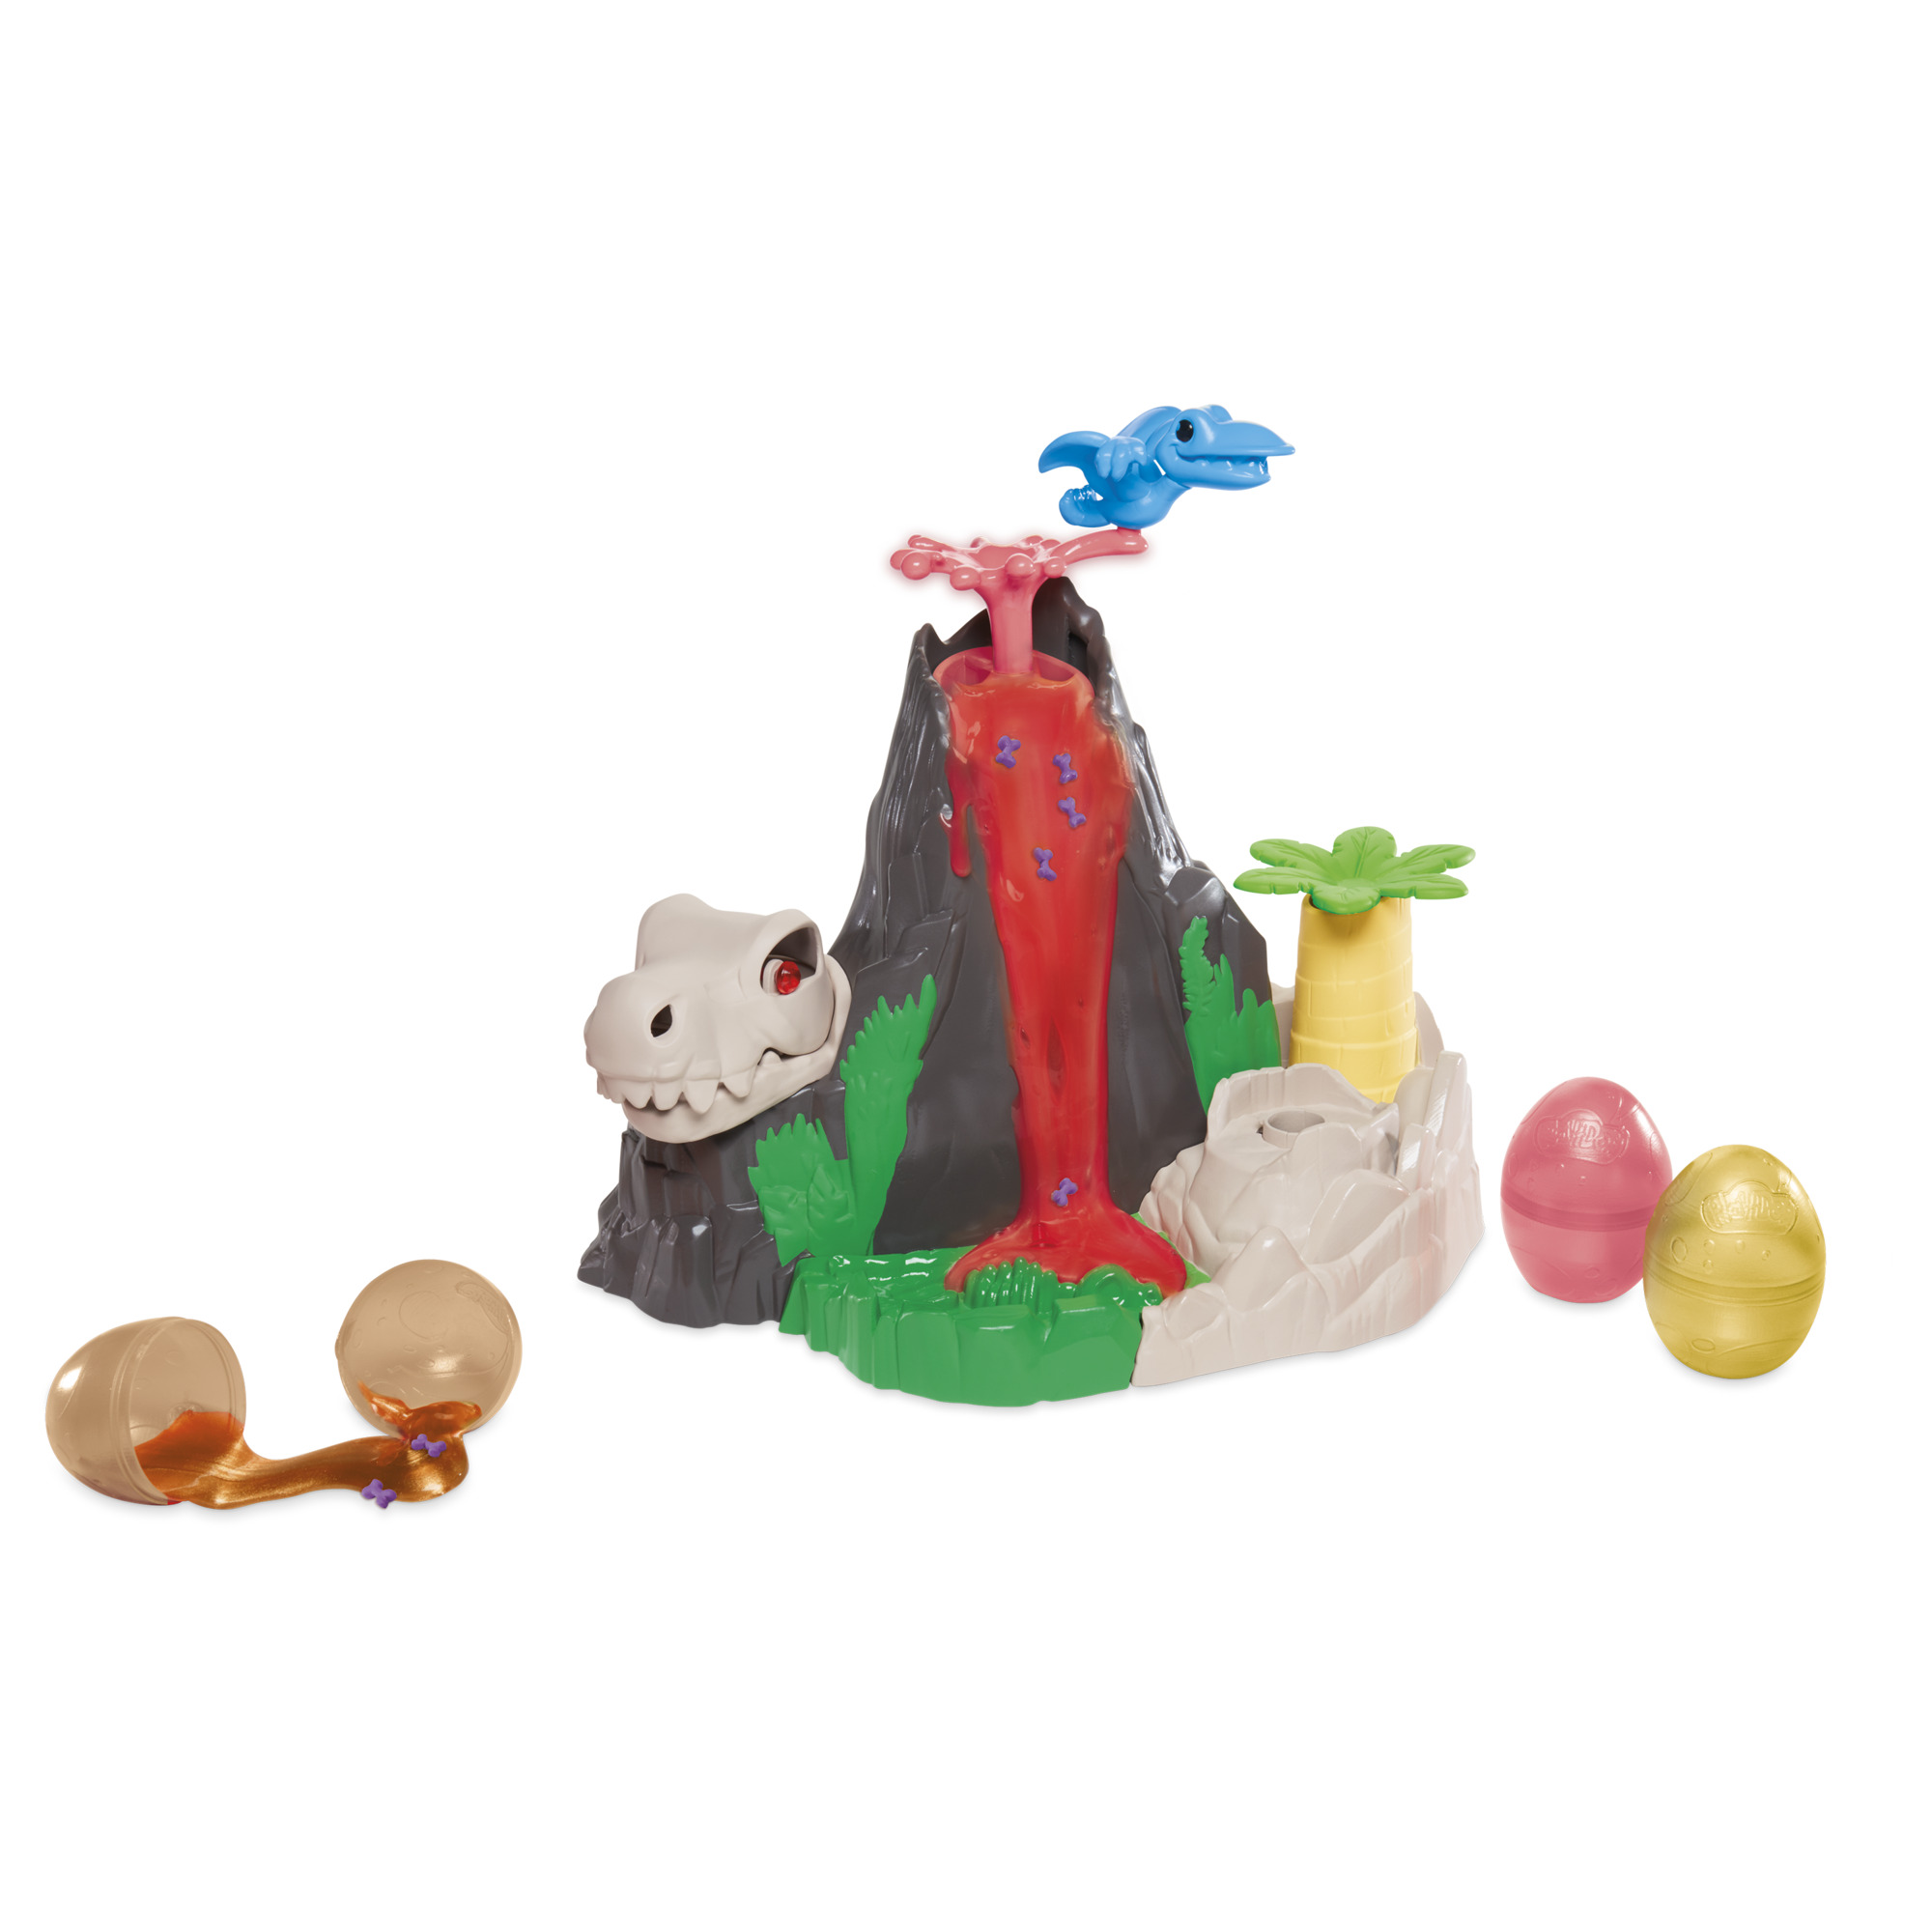 Play-Doh Slime Dino Crew Lava Bones Island Volcano Playset for Kids 4 Years and Up, Non-Toxic - image 1 of 14